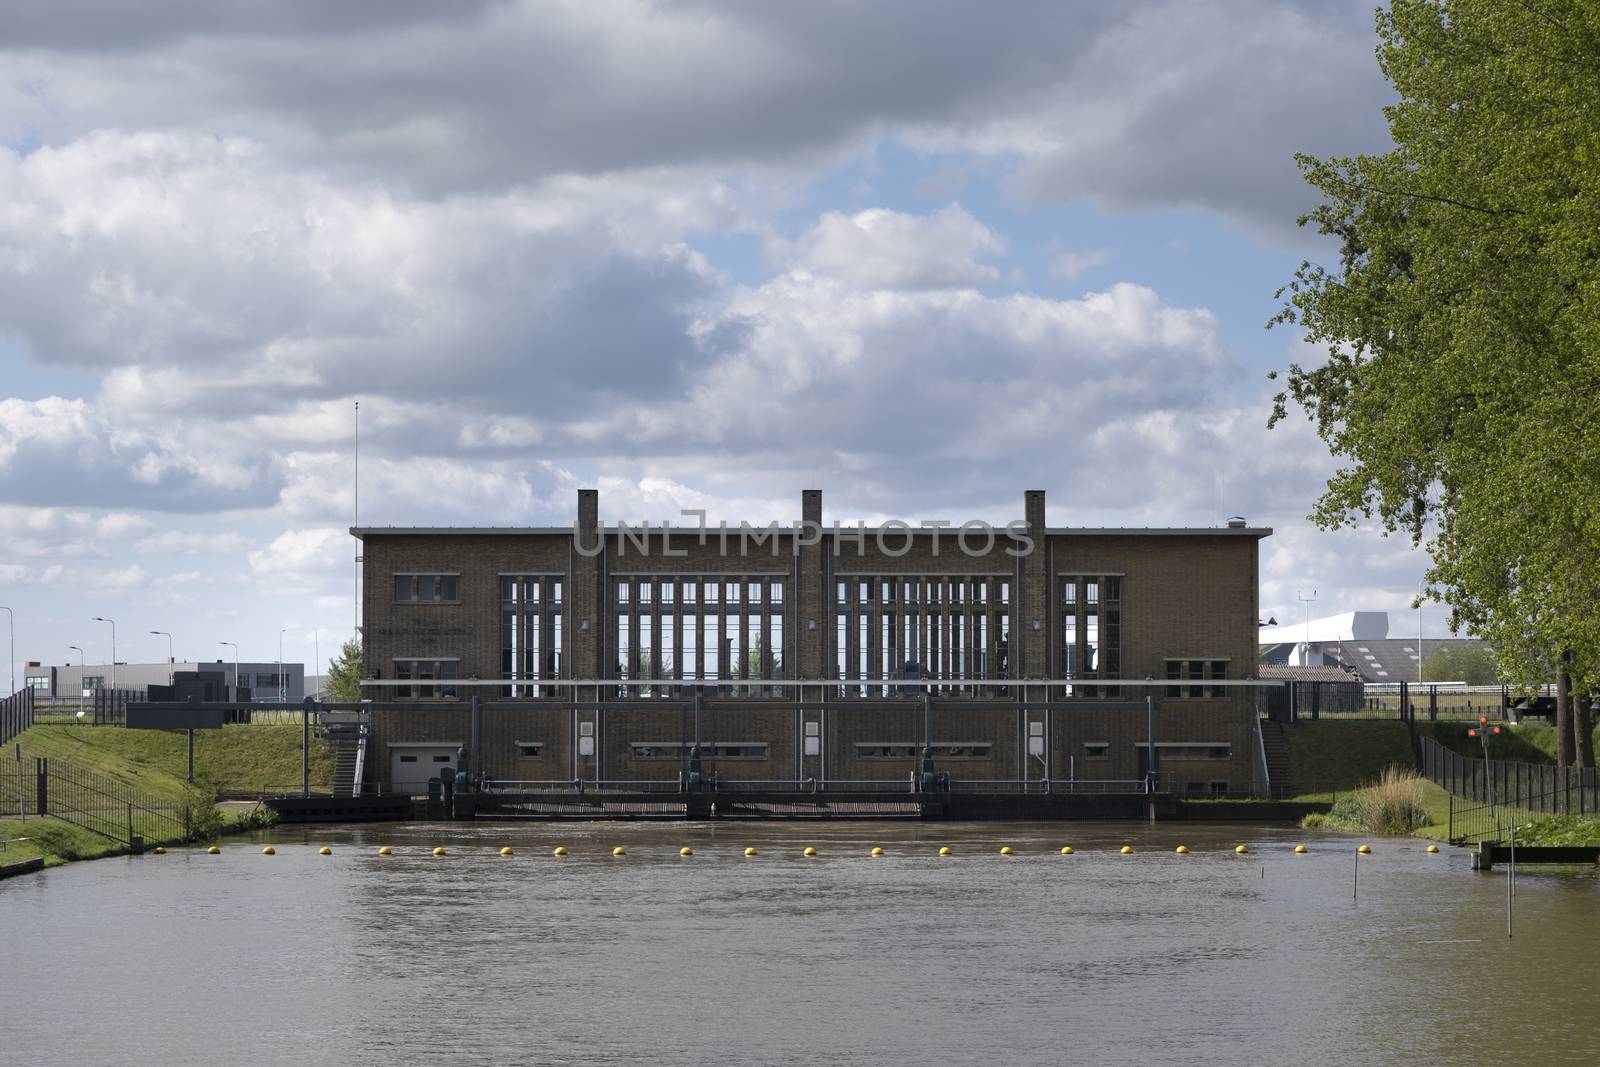 Mr. P.A. Pijnacker Hordijk pumping station, also known as the Bosa pumping station, is a pumping station in the Dutch city of Gouda. The pumping station is used by the Rijnland water board to keep the water level in the Rhine basins at the correct height.